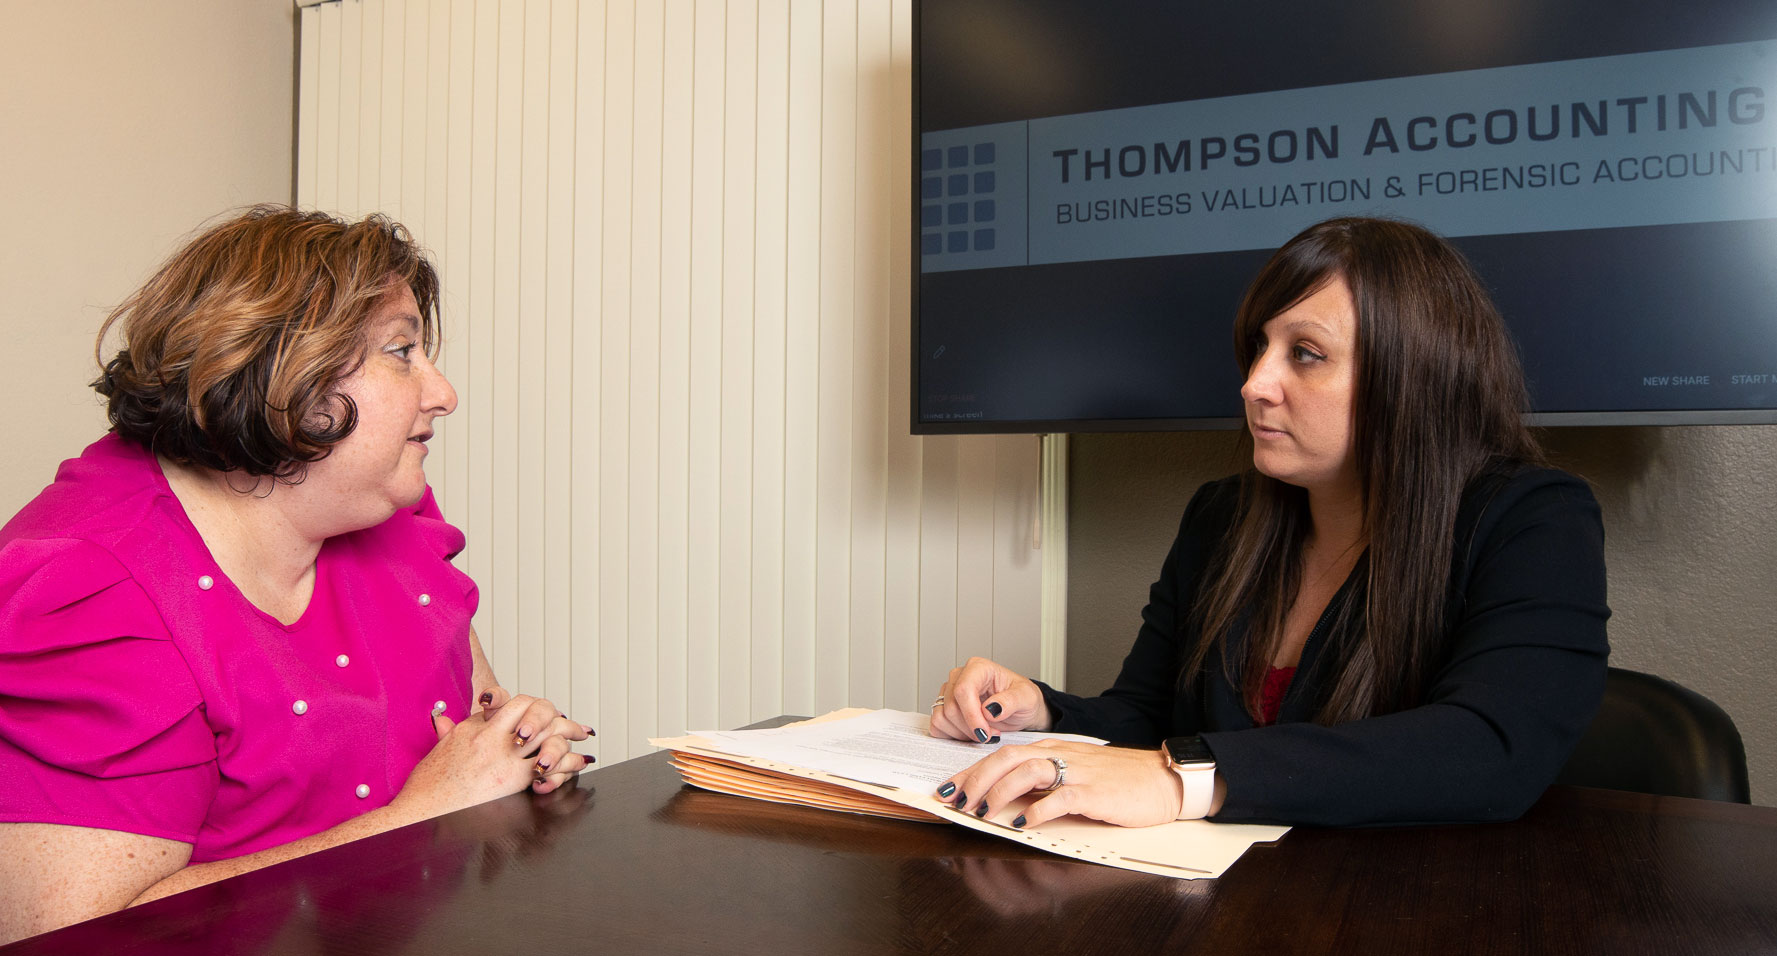 Megan Thompson consulting with a client in her office